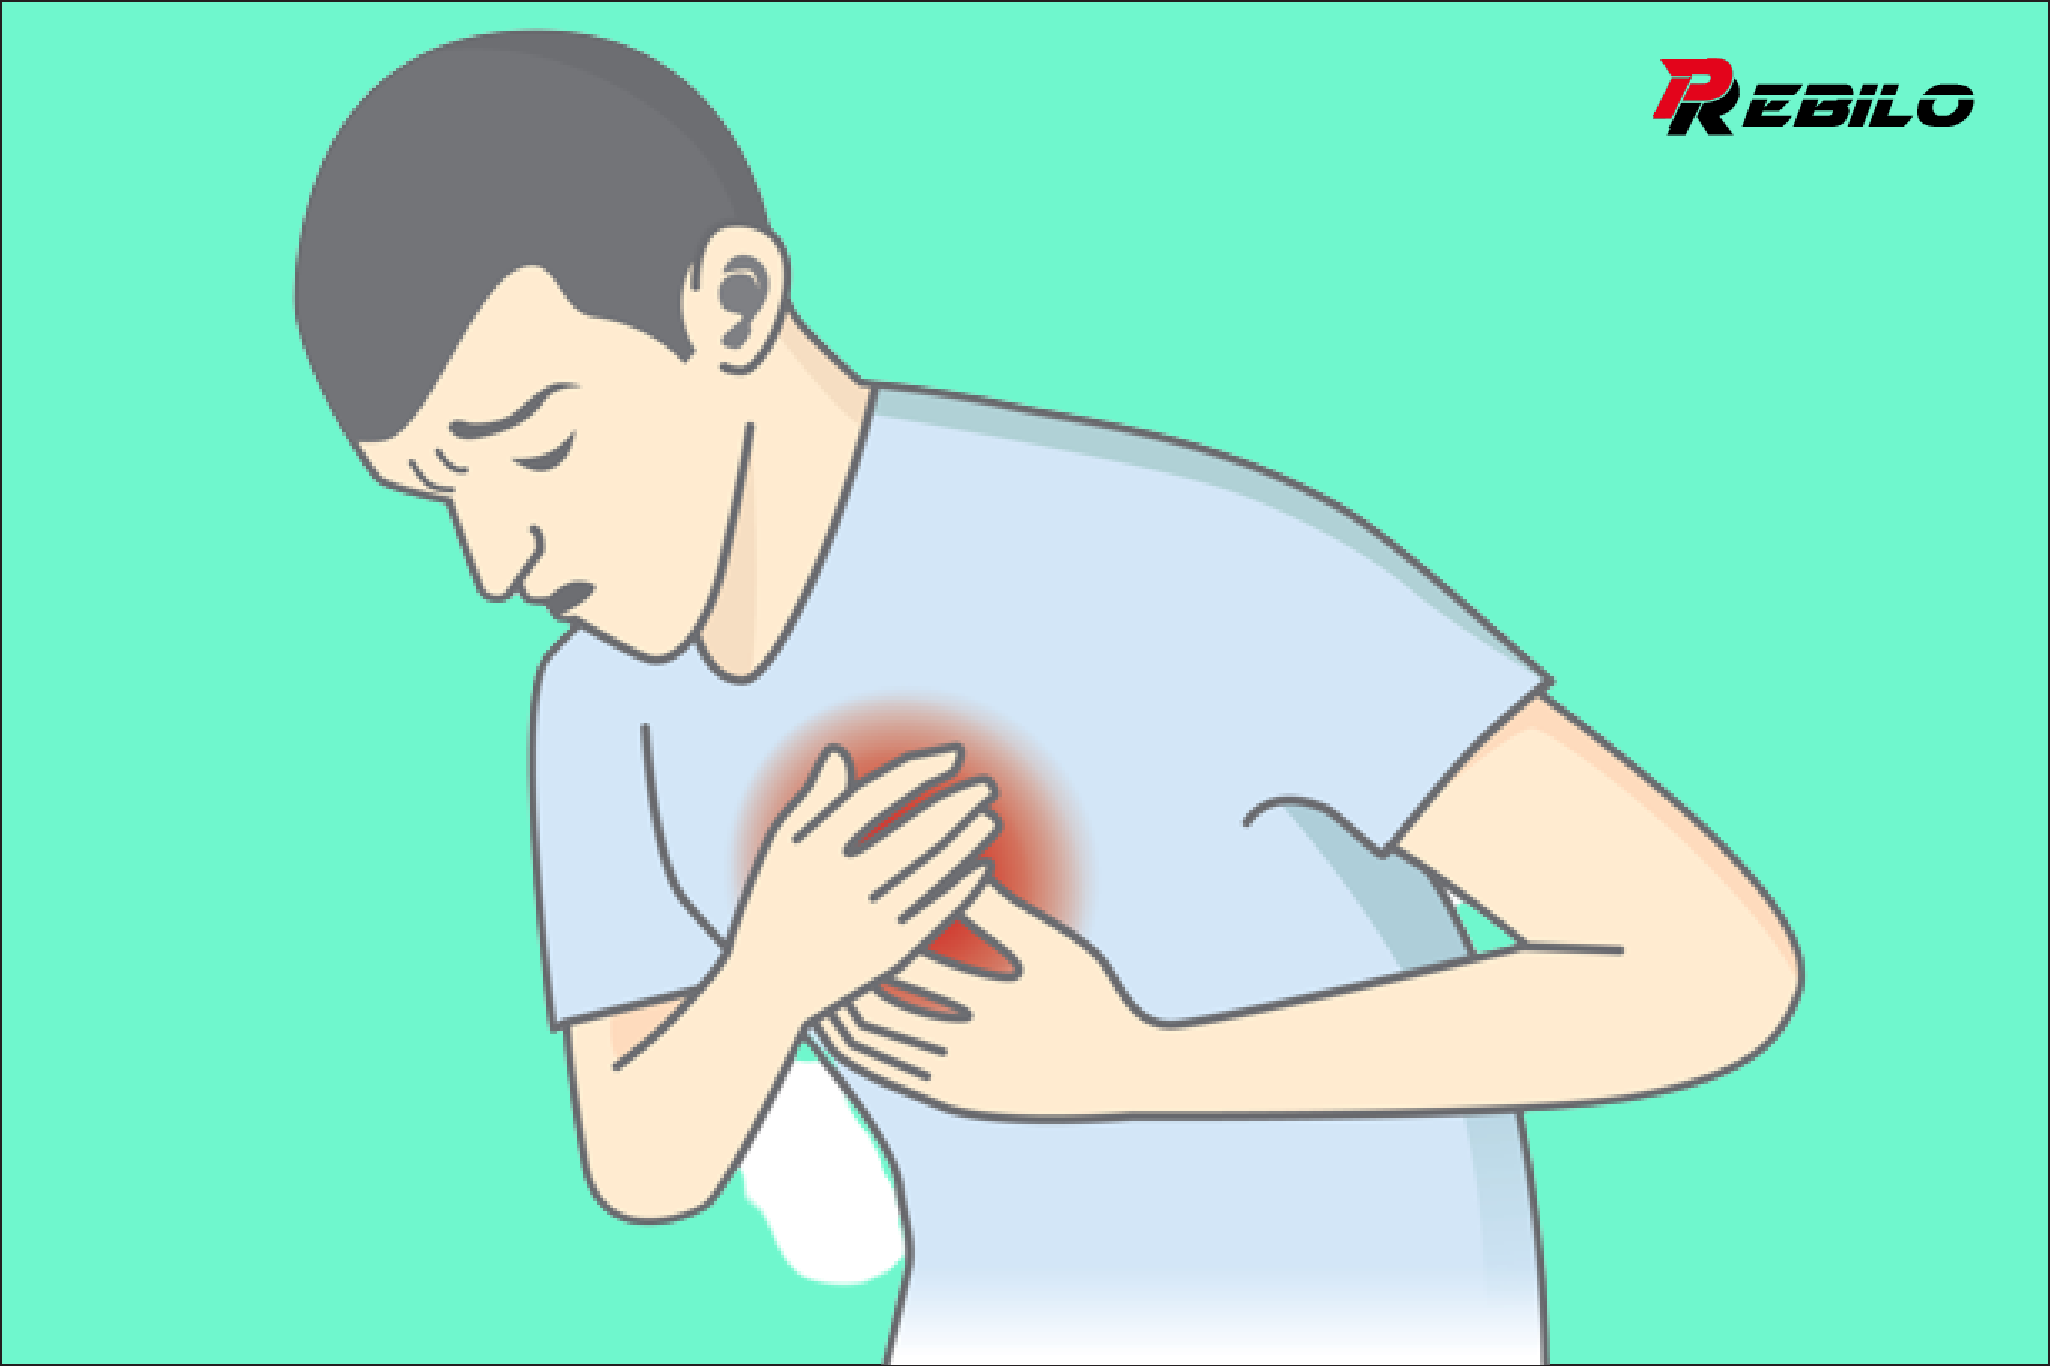 A month before a heart attack, your body will warn you: 6 warning signs to recognize.